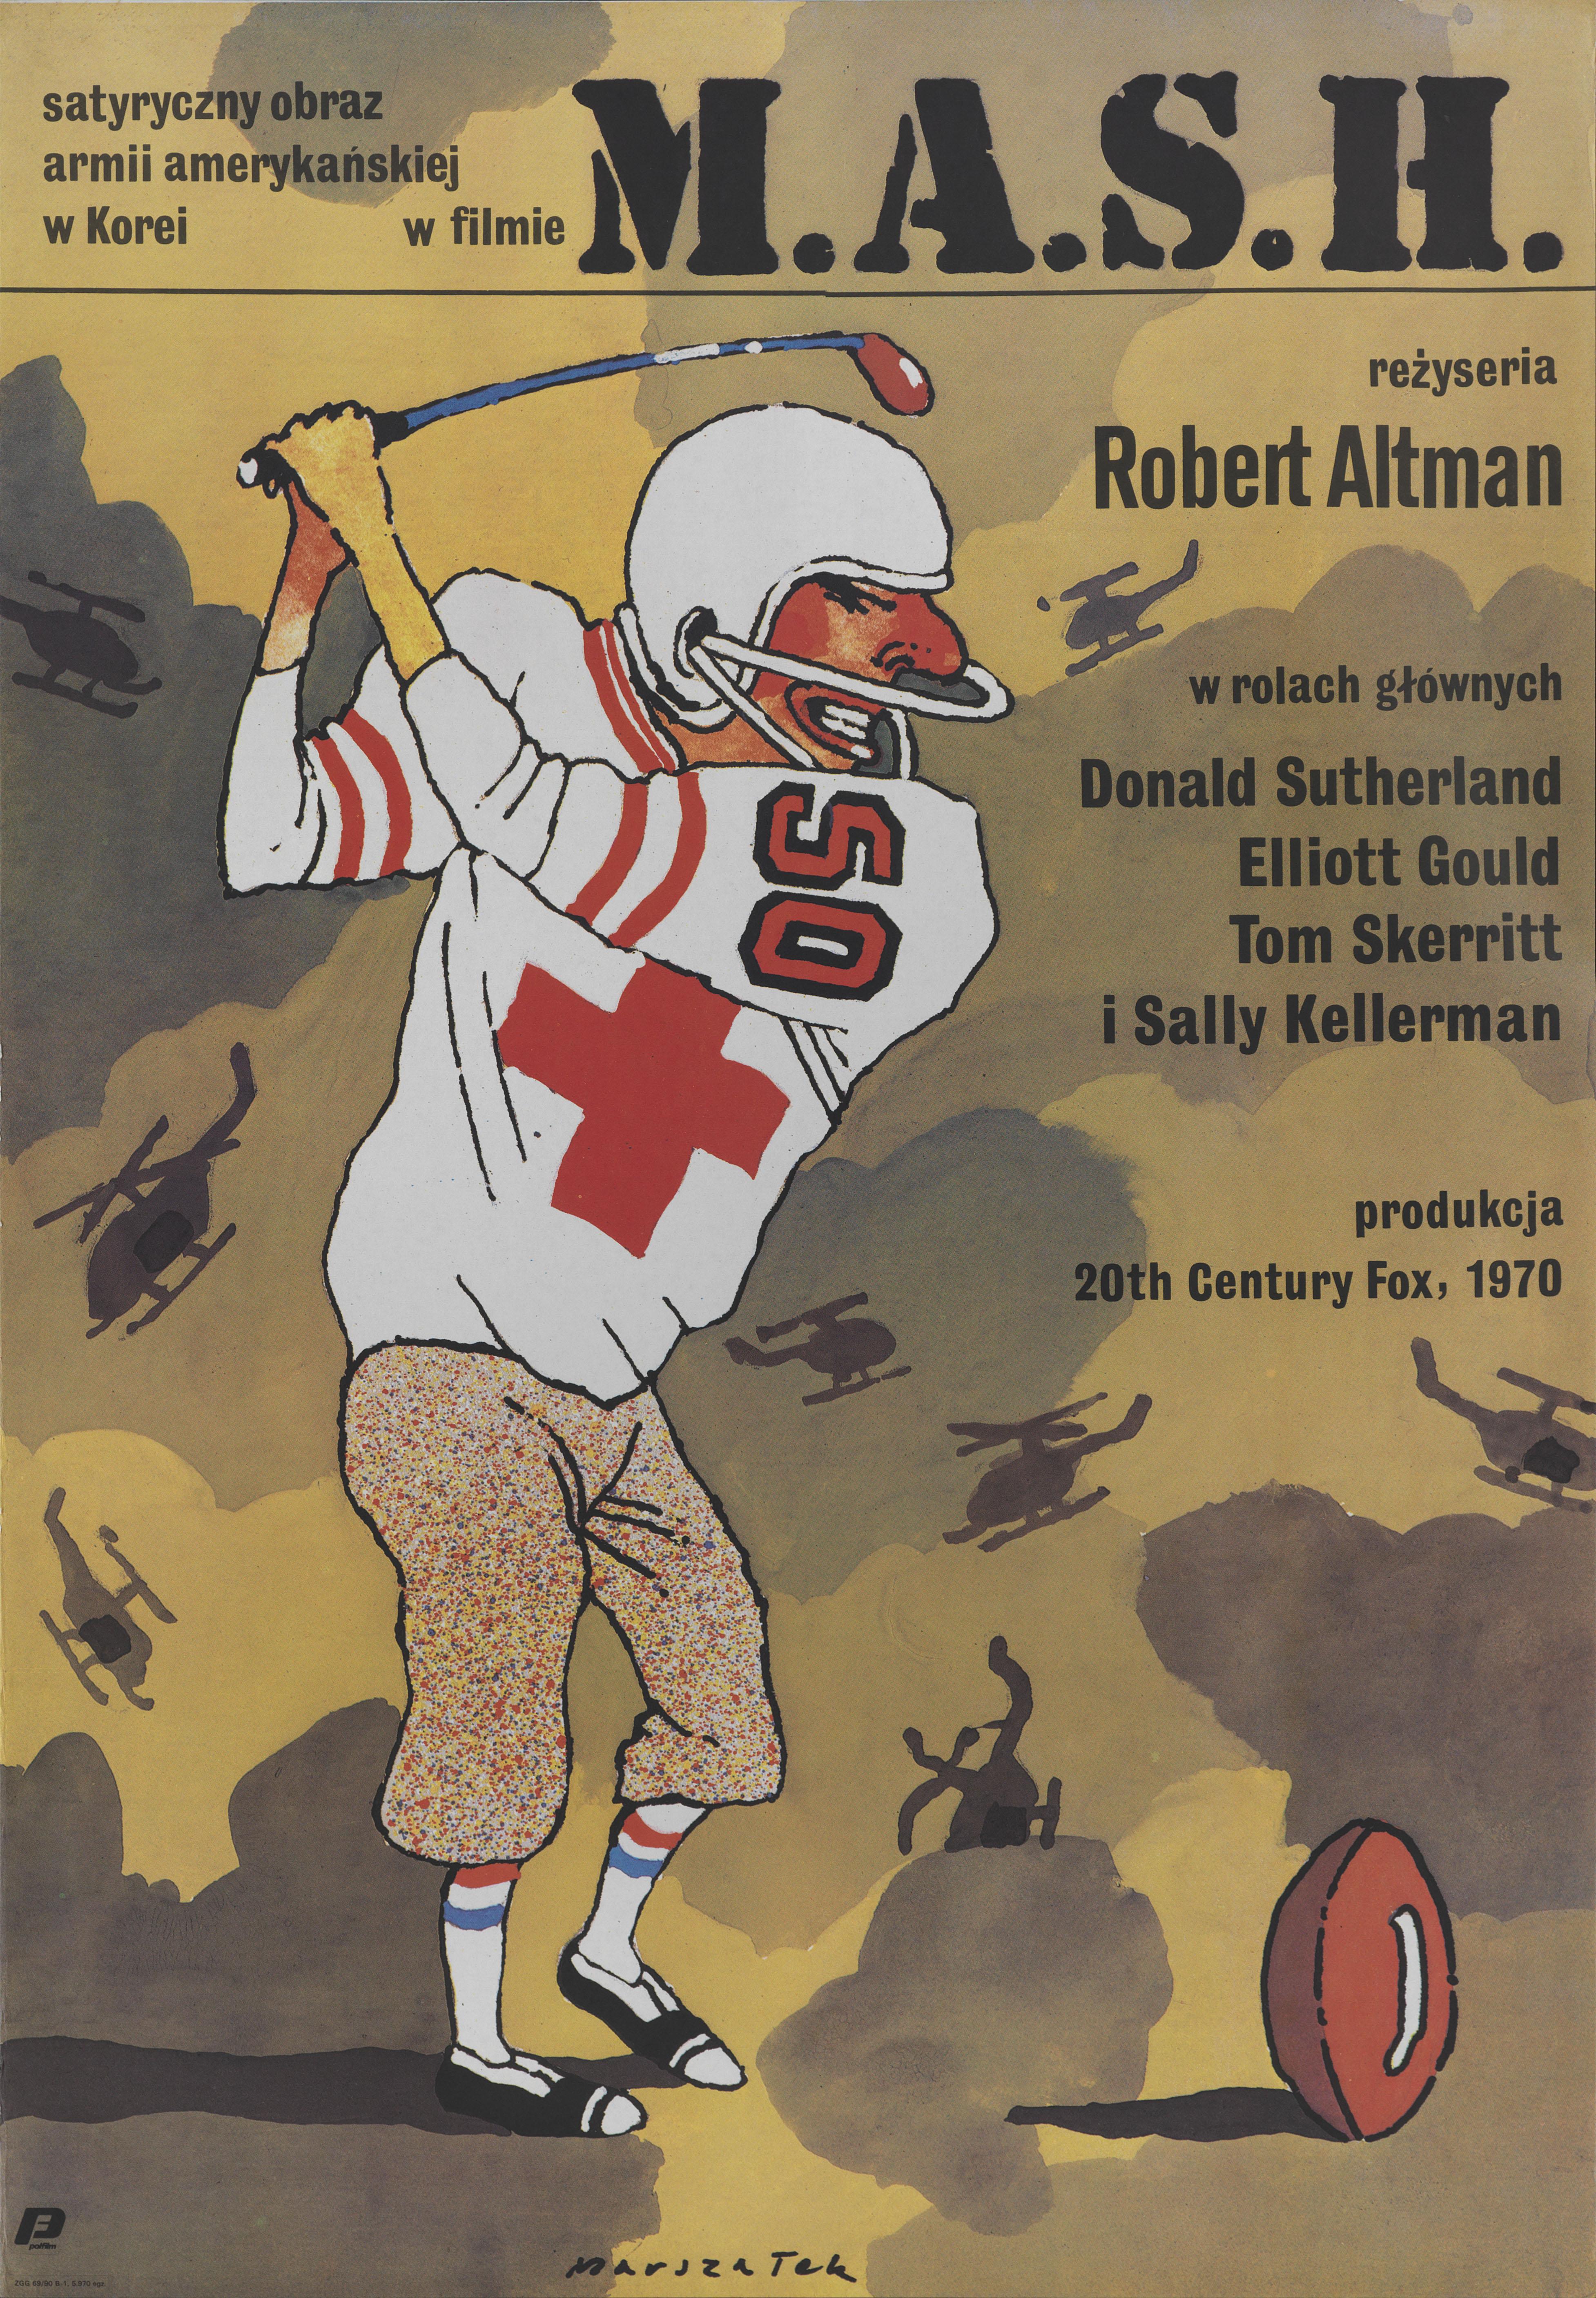 Original Polish film poster for the 1970 war comedy Mash.
This film starred Donald Sutherland and Elliott Gould and was directed by Robert Altman.
The artwork on this poster is by the Polish artist Grzegorz Marszalek (b. 1946)
This poster is